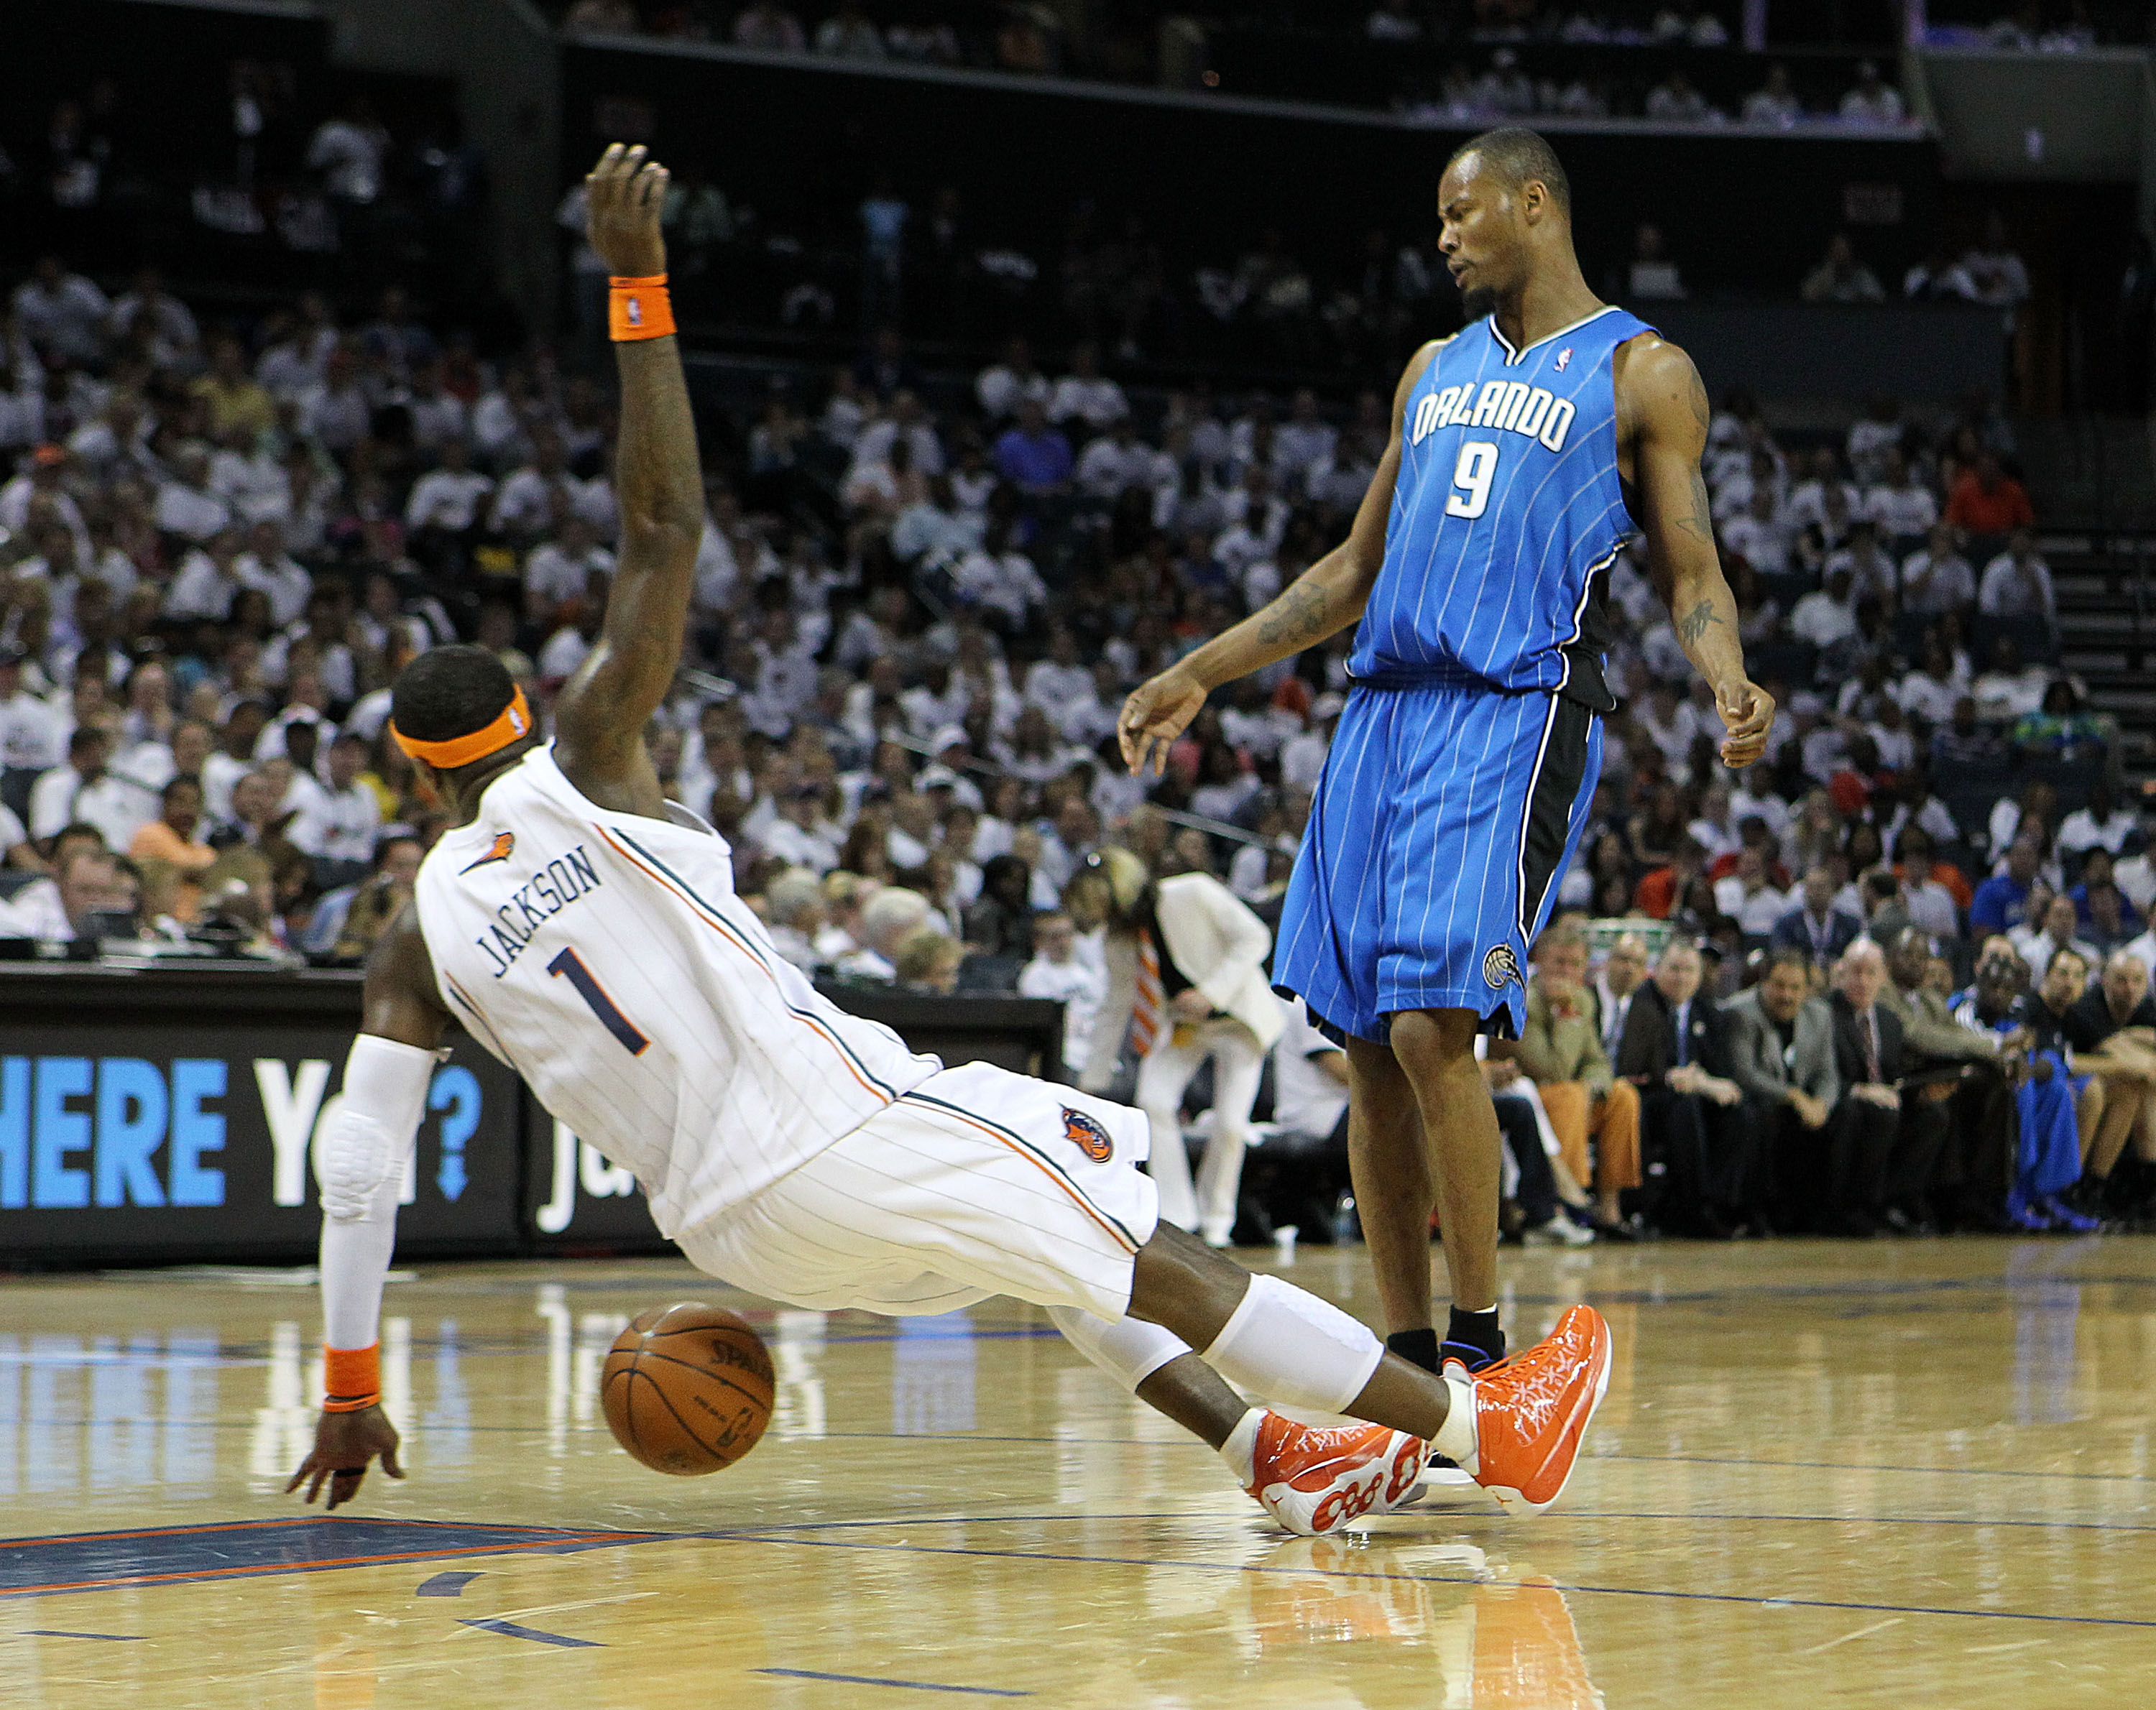 CHARLOTTE - APRIL 24:  Guard Stephen Jackson #1 of the Charlotte Bobcats draws an offensive foul on forward Rashard Lewis #9 of the Orlando Magic during Game Three of the Eastern Conference Quarterfinals during the 2010 NBA Playoffs at Time Warner Cable A